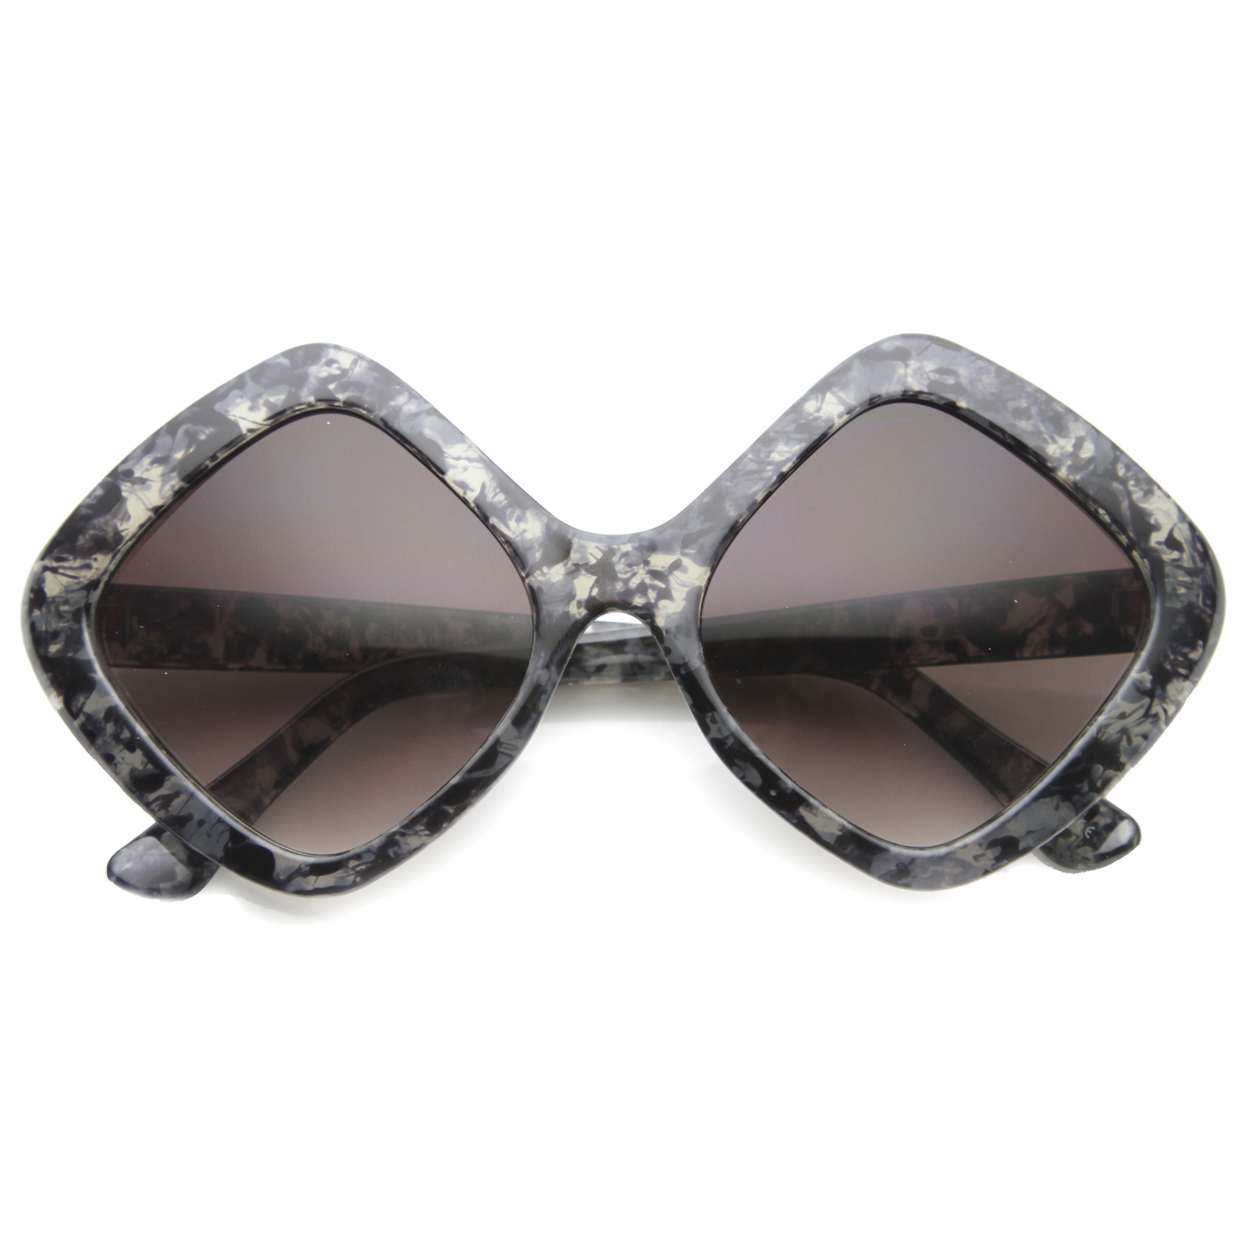 Womens Oversized Sunglasses With UV400 Protected Gradient Lens 9968 - Grey Block-Tortoise